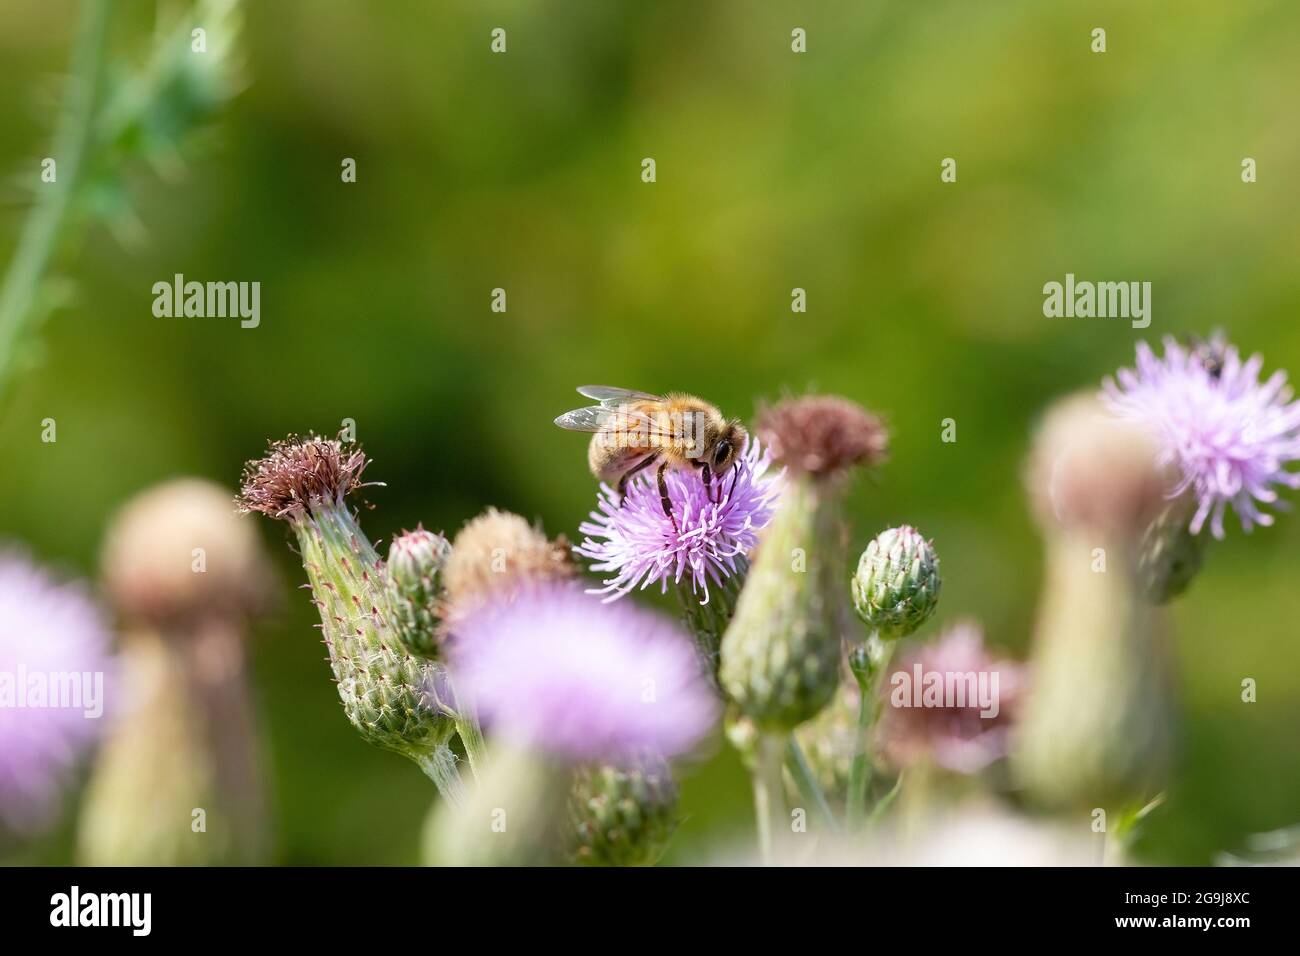 A Honey bee on a purple thistle flower Stock Photo